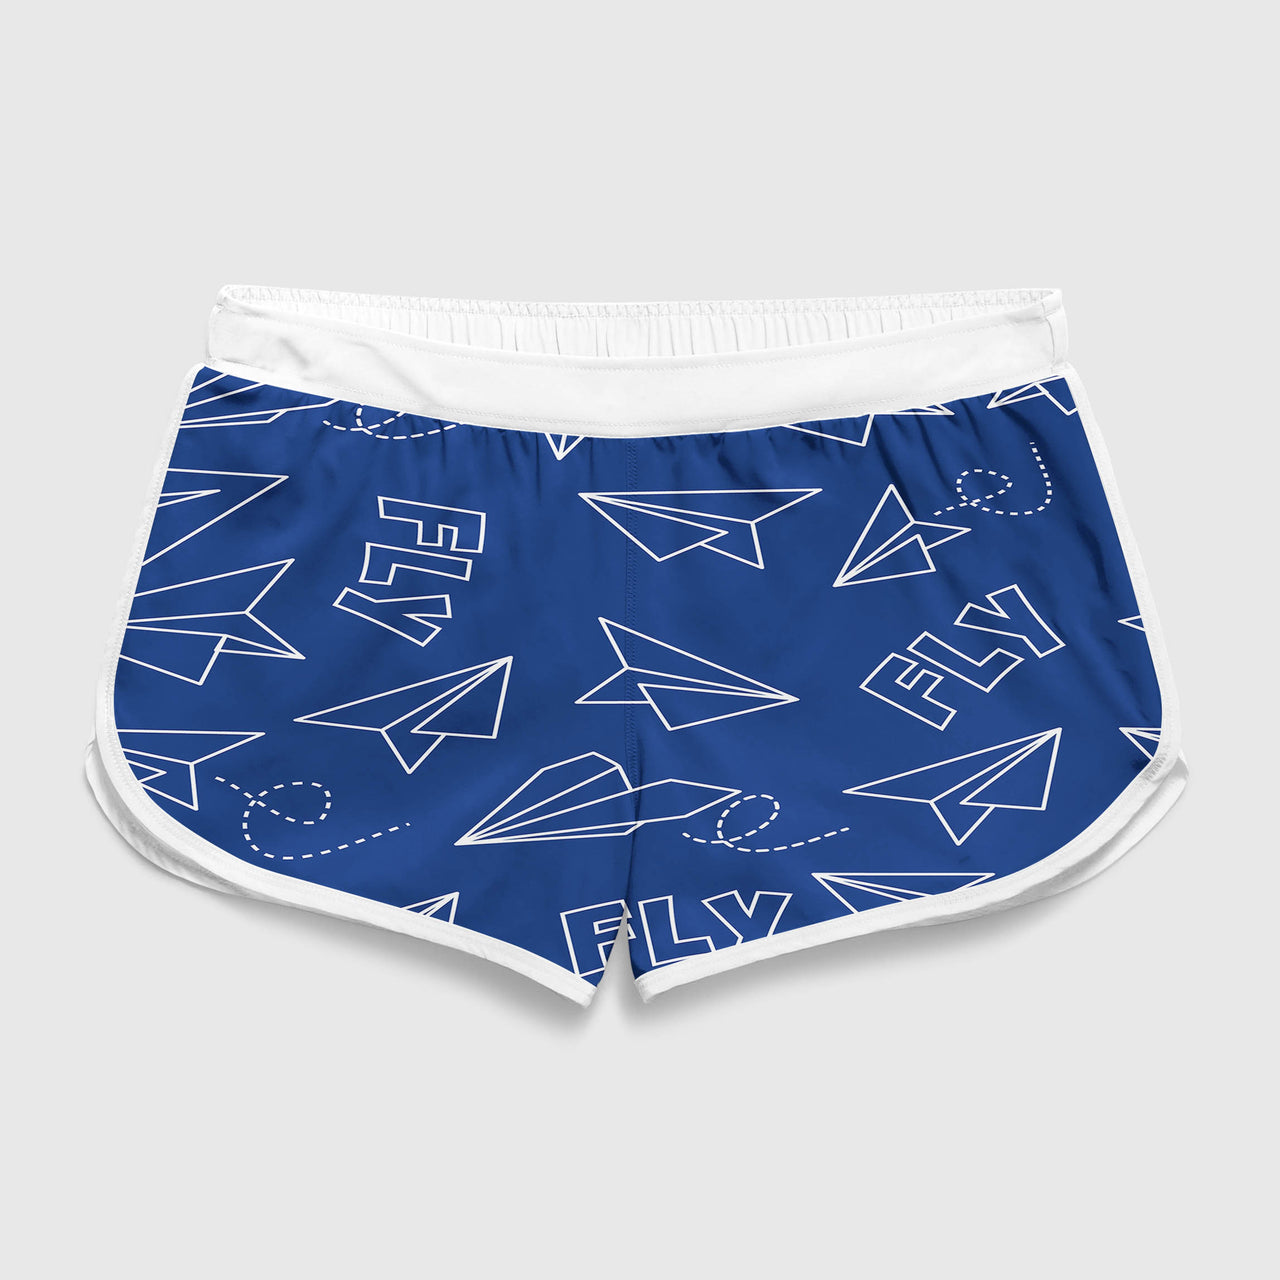 Paper Airplane & Fly (Blue) Designed Women Beach Style Shorts